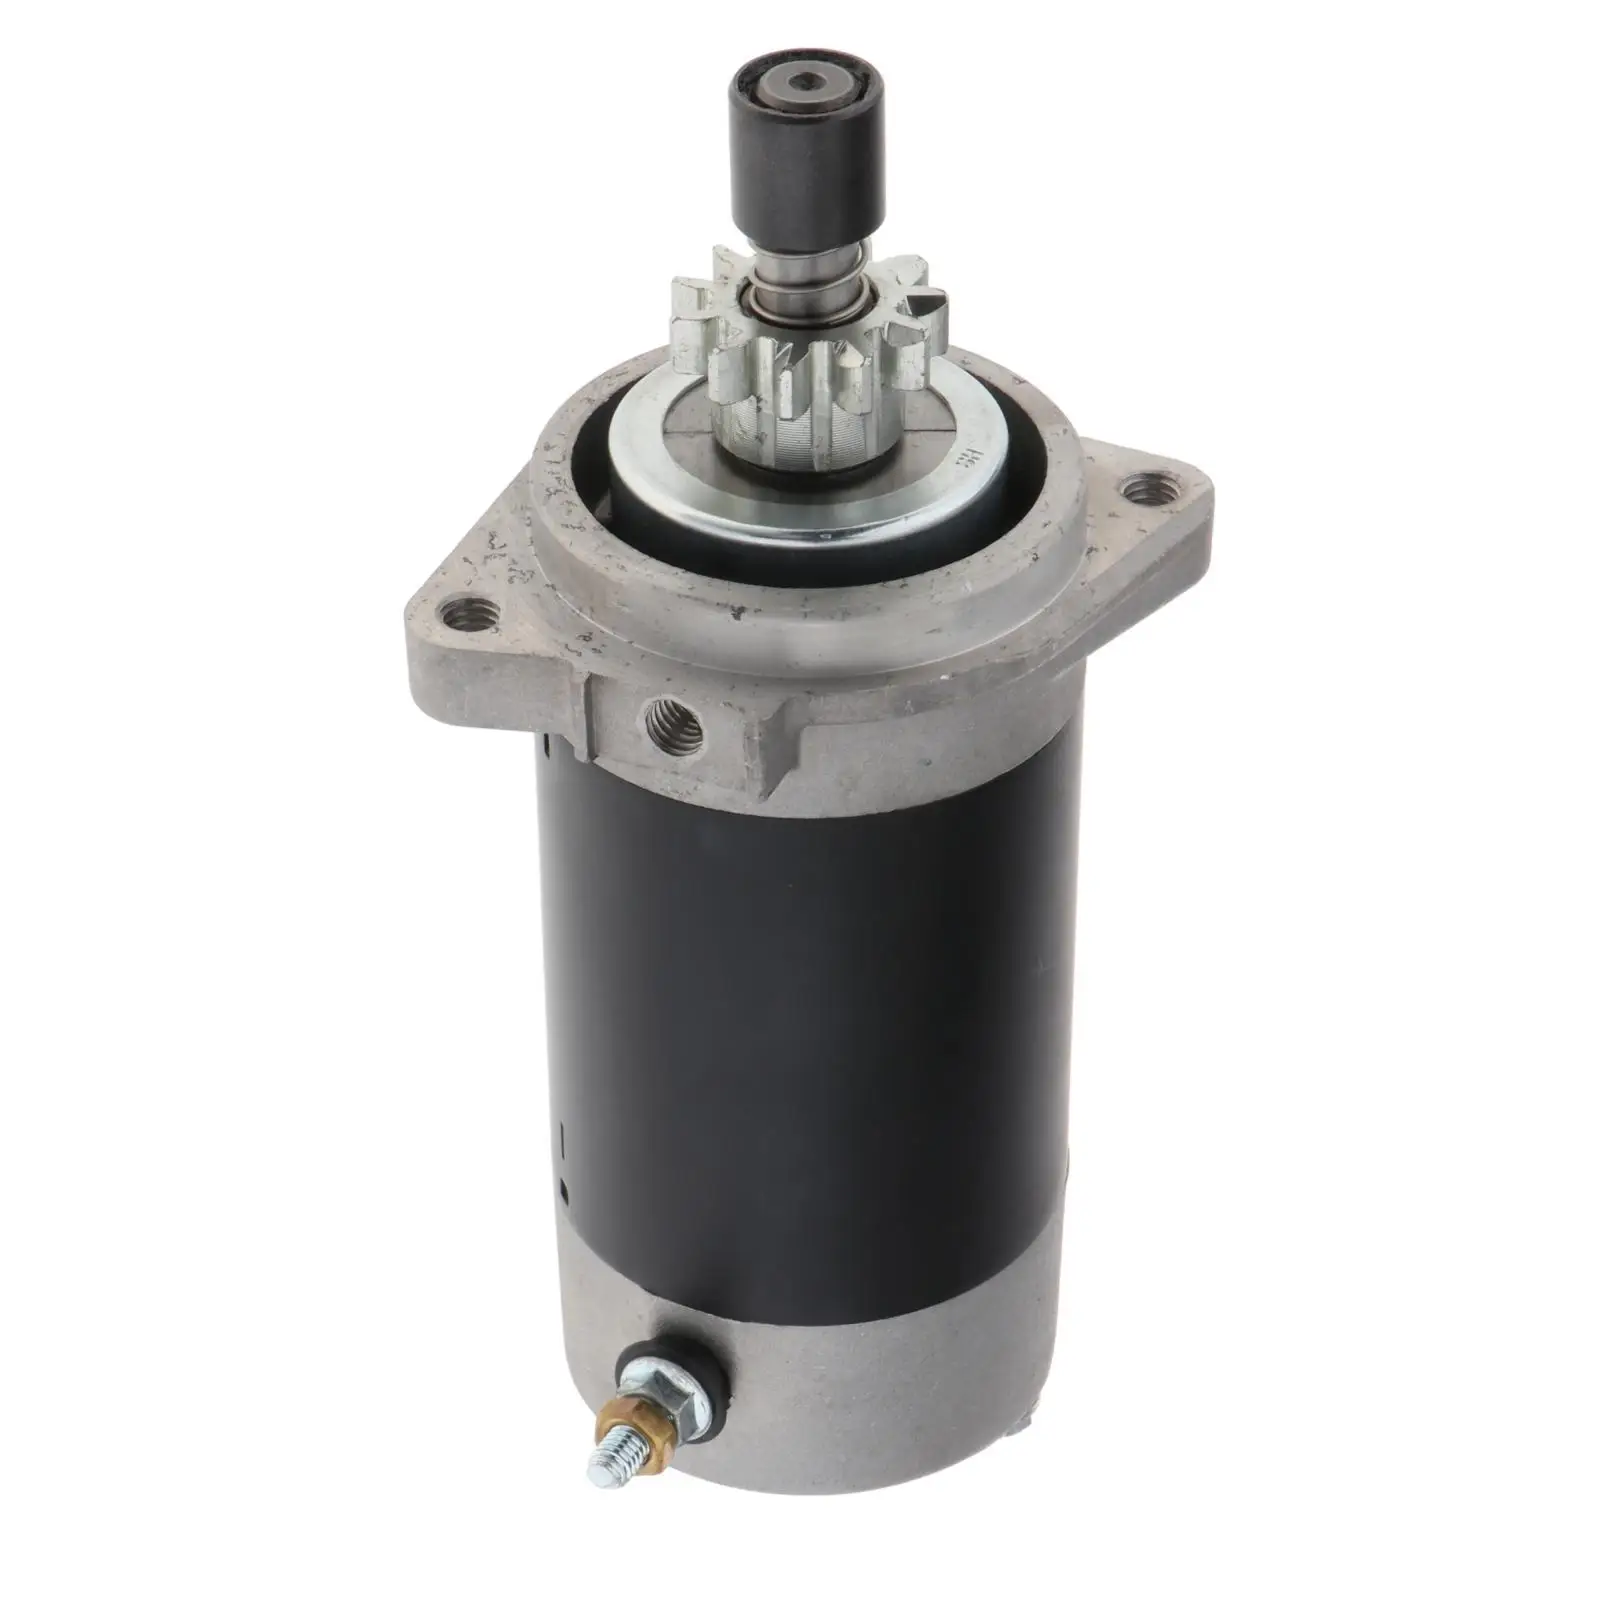 Boat Electric Starter Motor for Yamaha 2-stroke 25HP 30HP 689-81800-13,689-81800-12, Durable